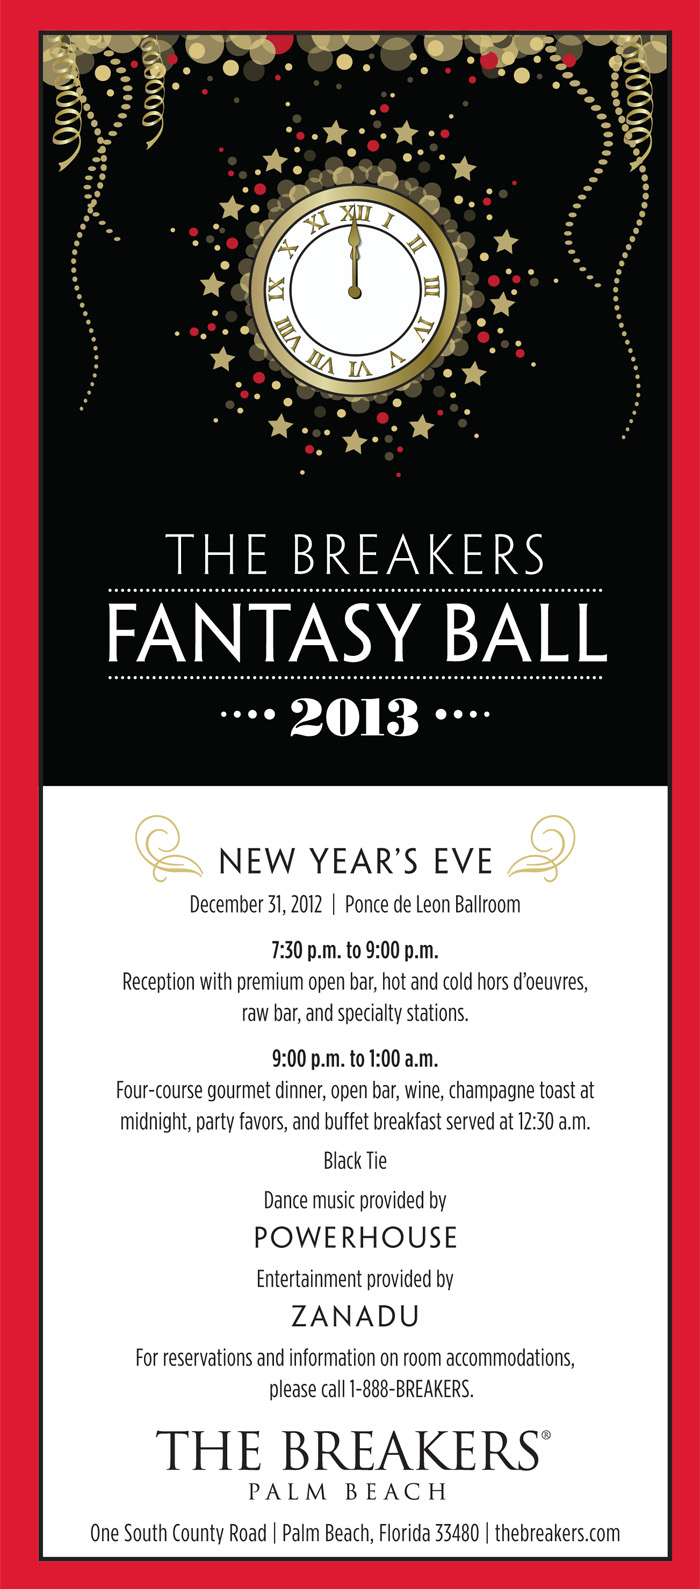 The Breakers New Year's Eve Fantasy Ball